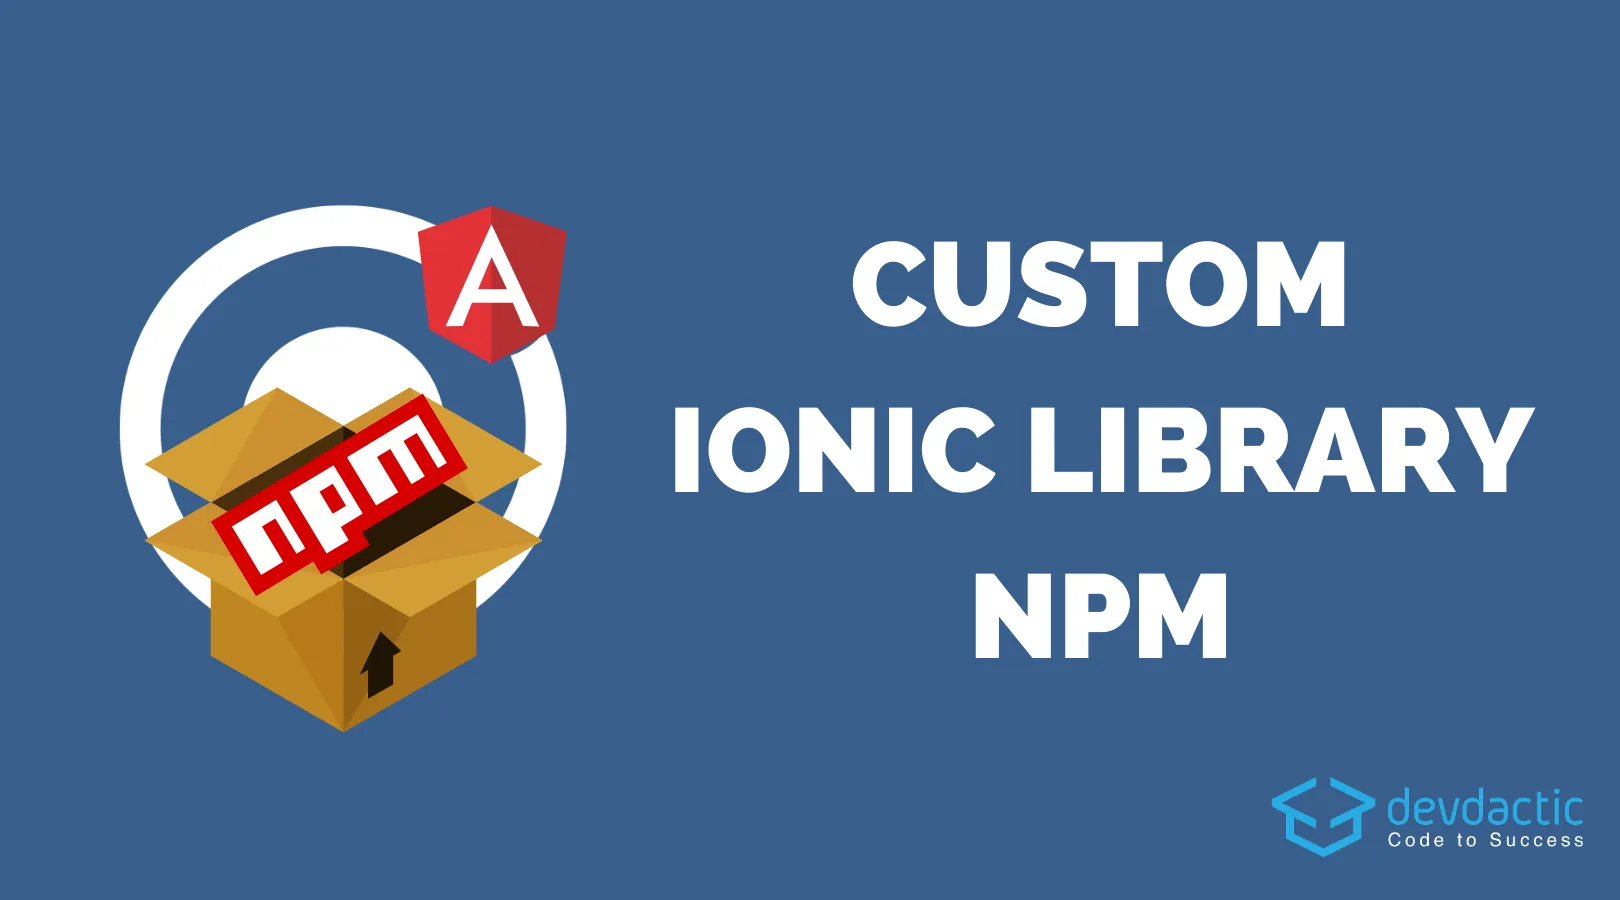 How to Build Your Own Ionic Library for NPM